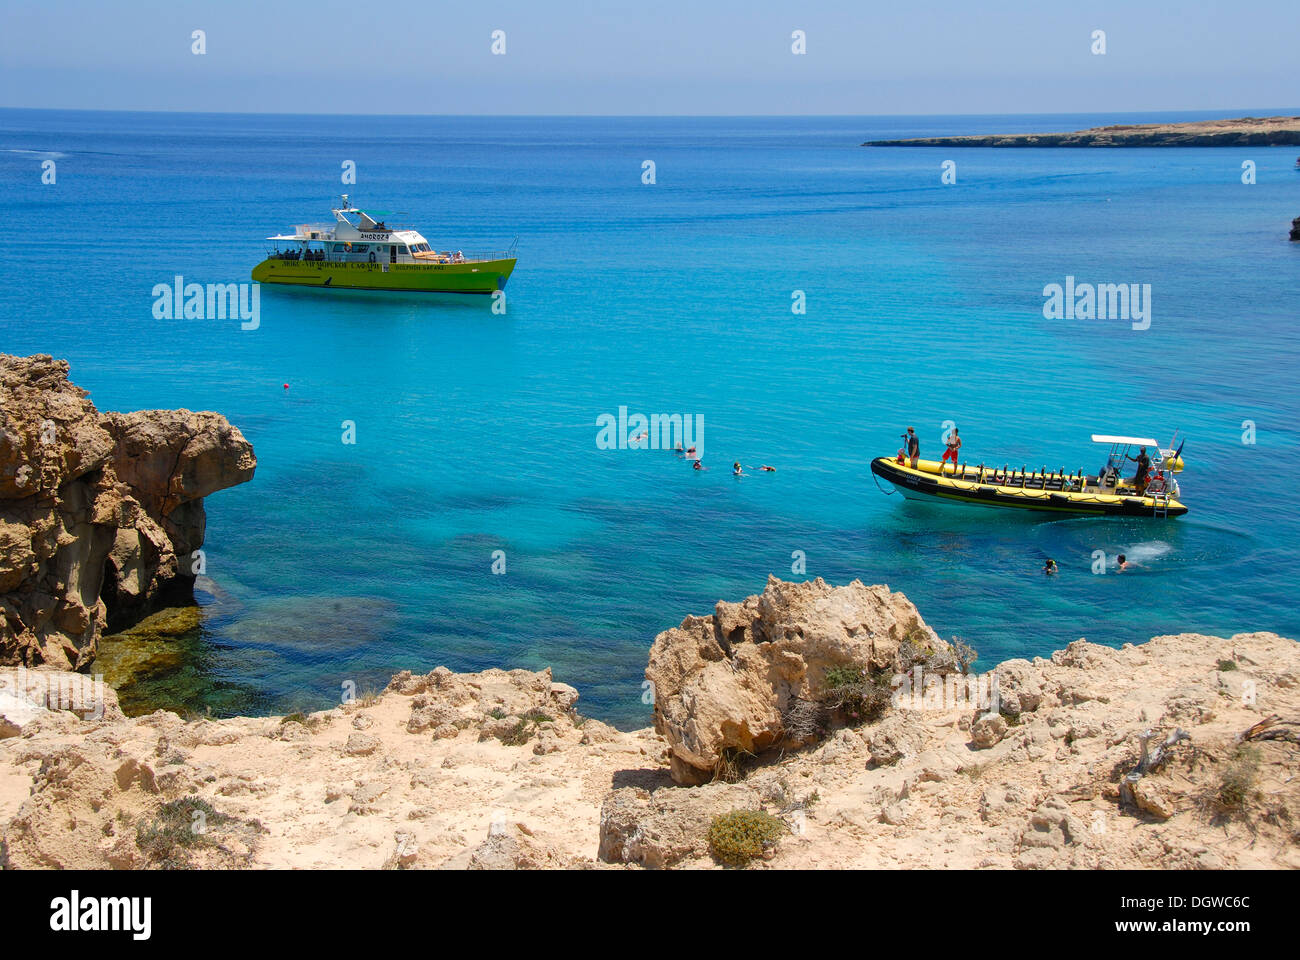 Rock coast, cliffs and blue sea with boats and swimming people, Cap Gkreko, Cape Greco in Ayia Napa, Southern Cyprus Stock Photo